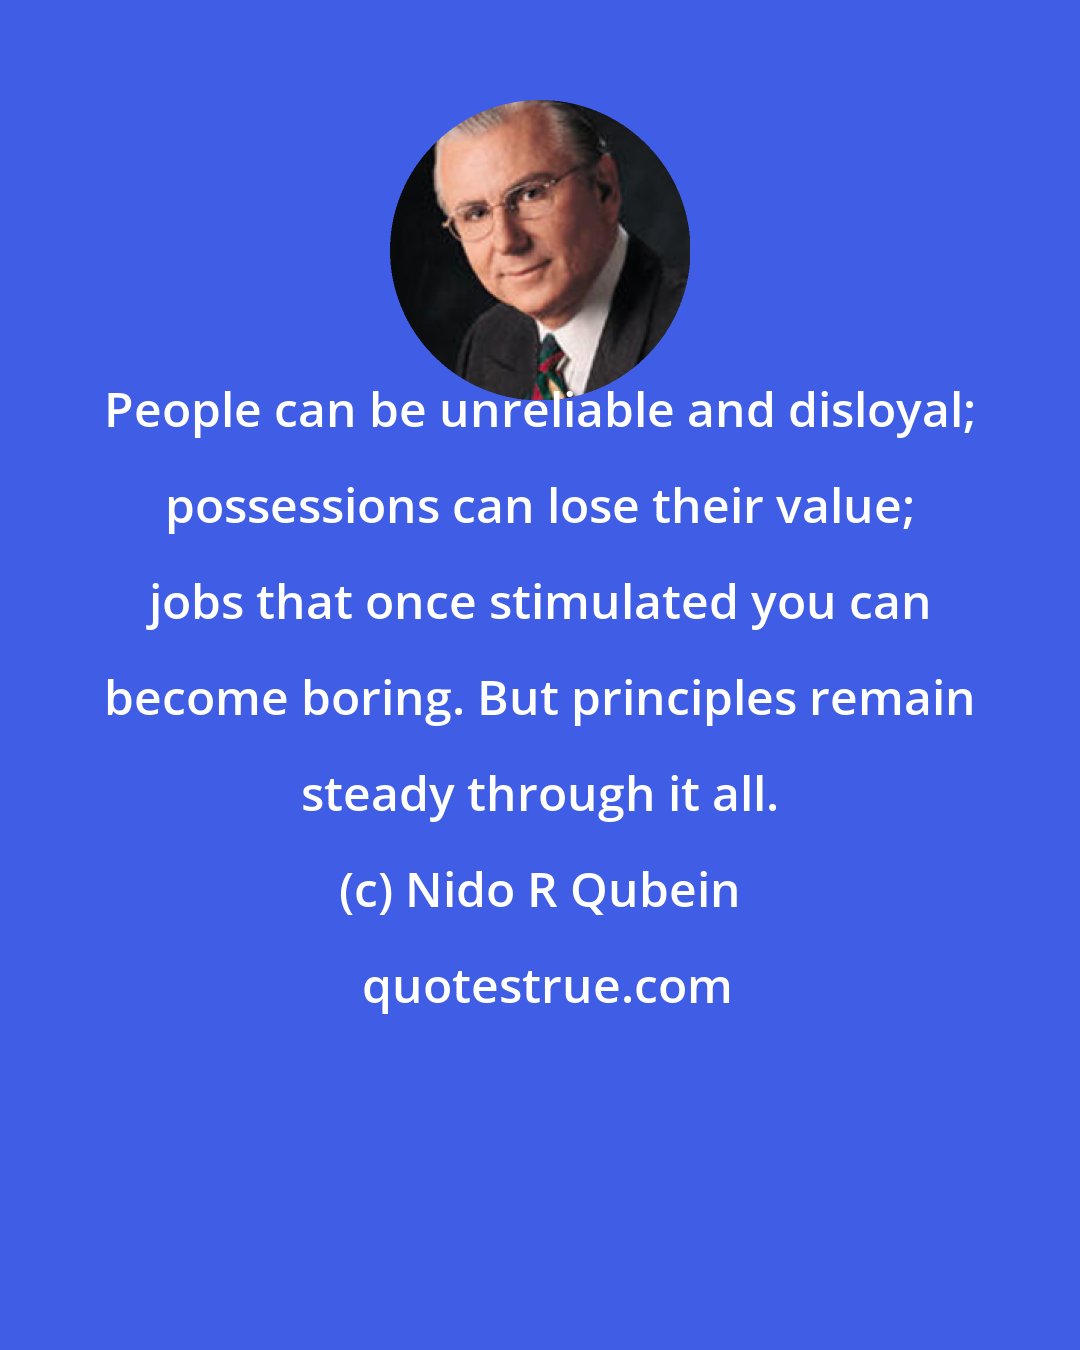 Nido R Qubein: People can be unreliable and disloyal; possessions can lose their value; jobs that once stimulated you can become boring. But principles remain steady through it all.